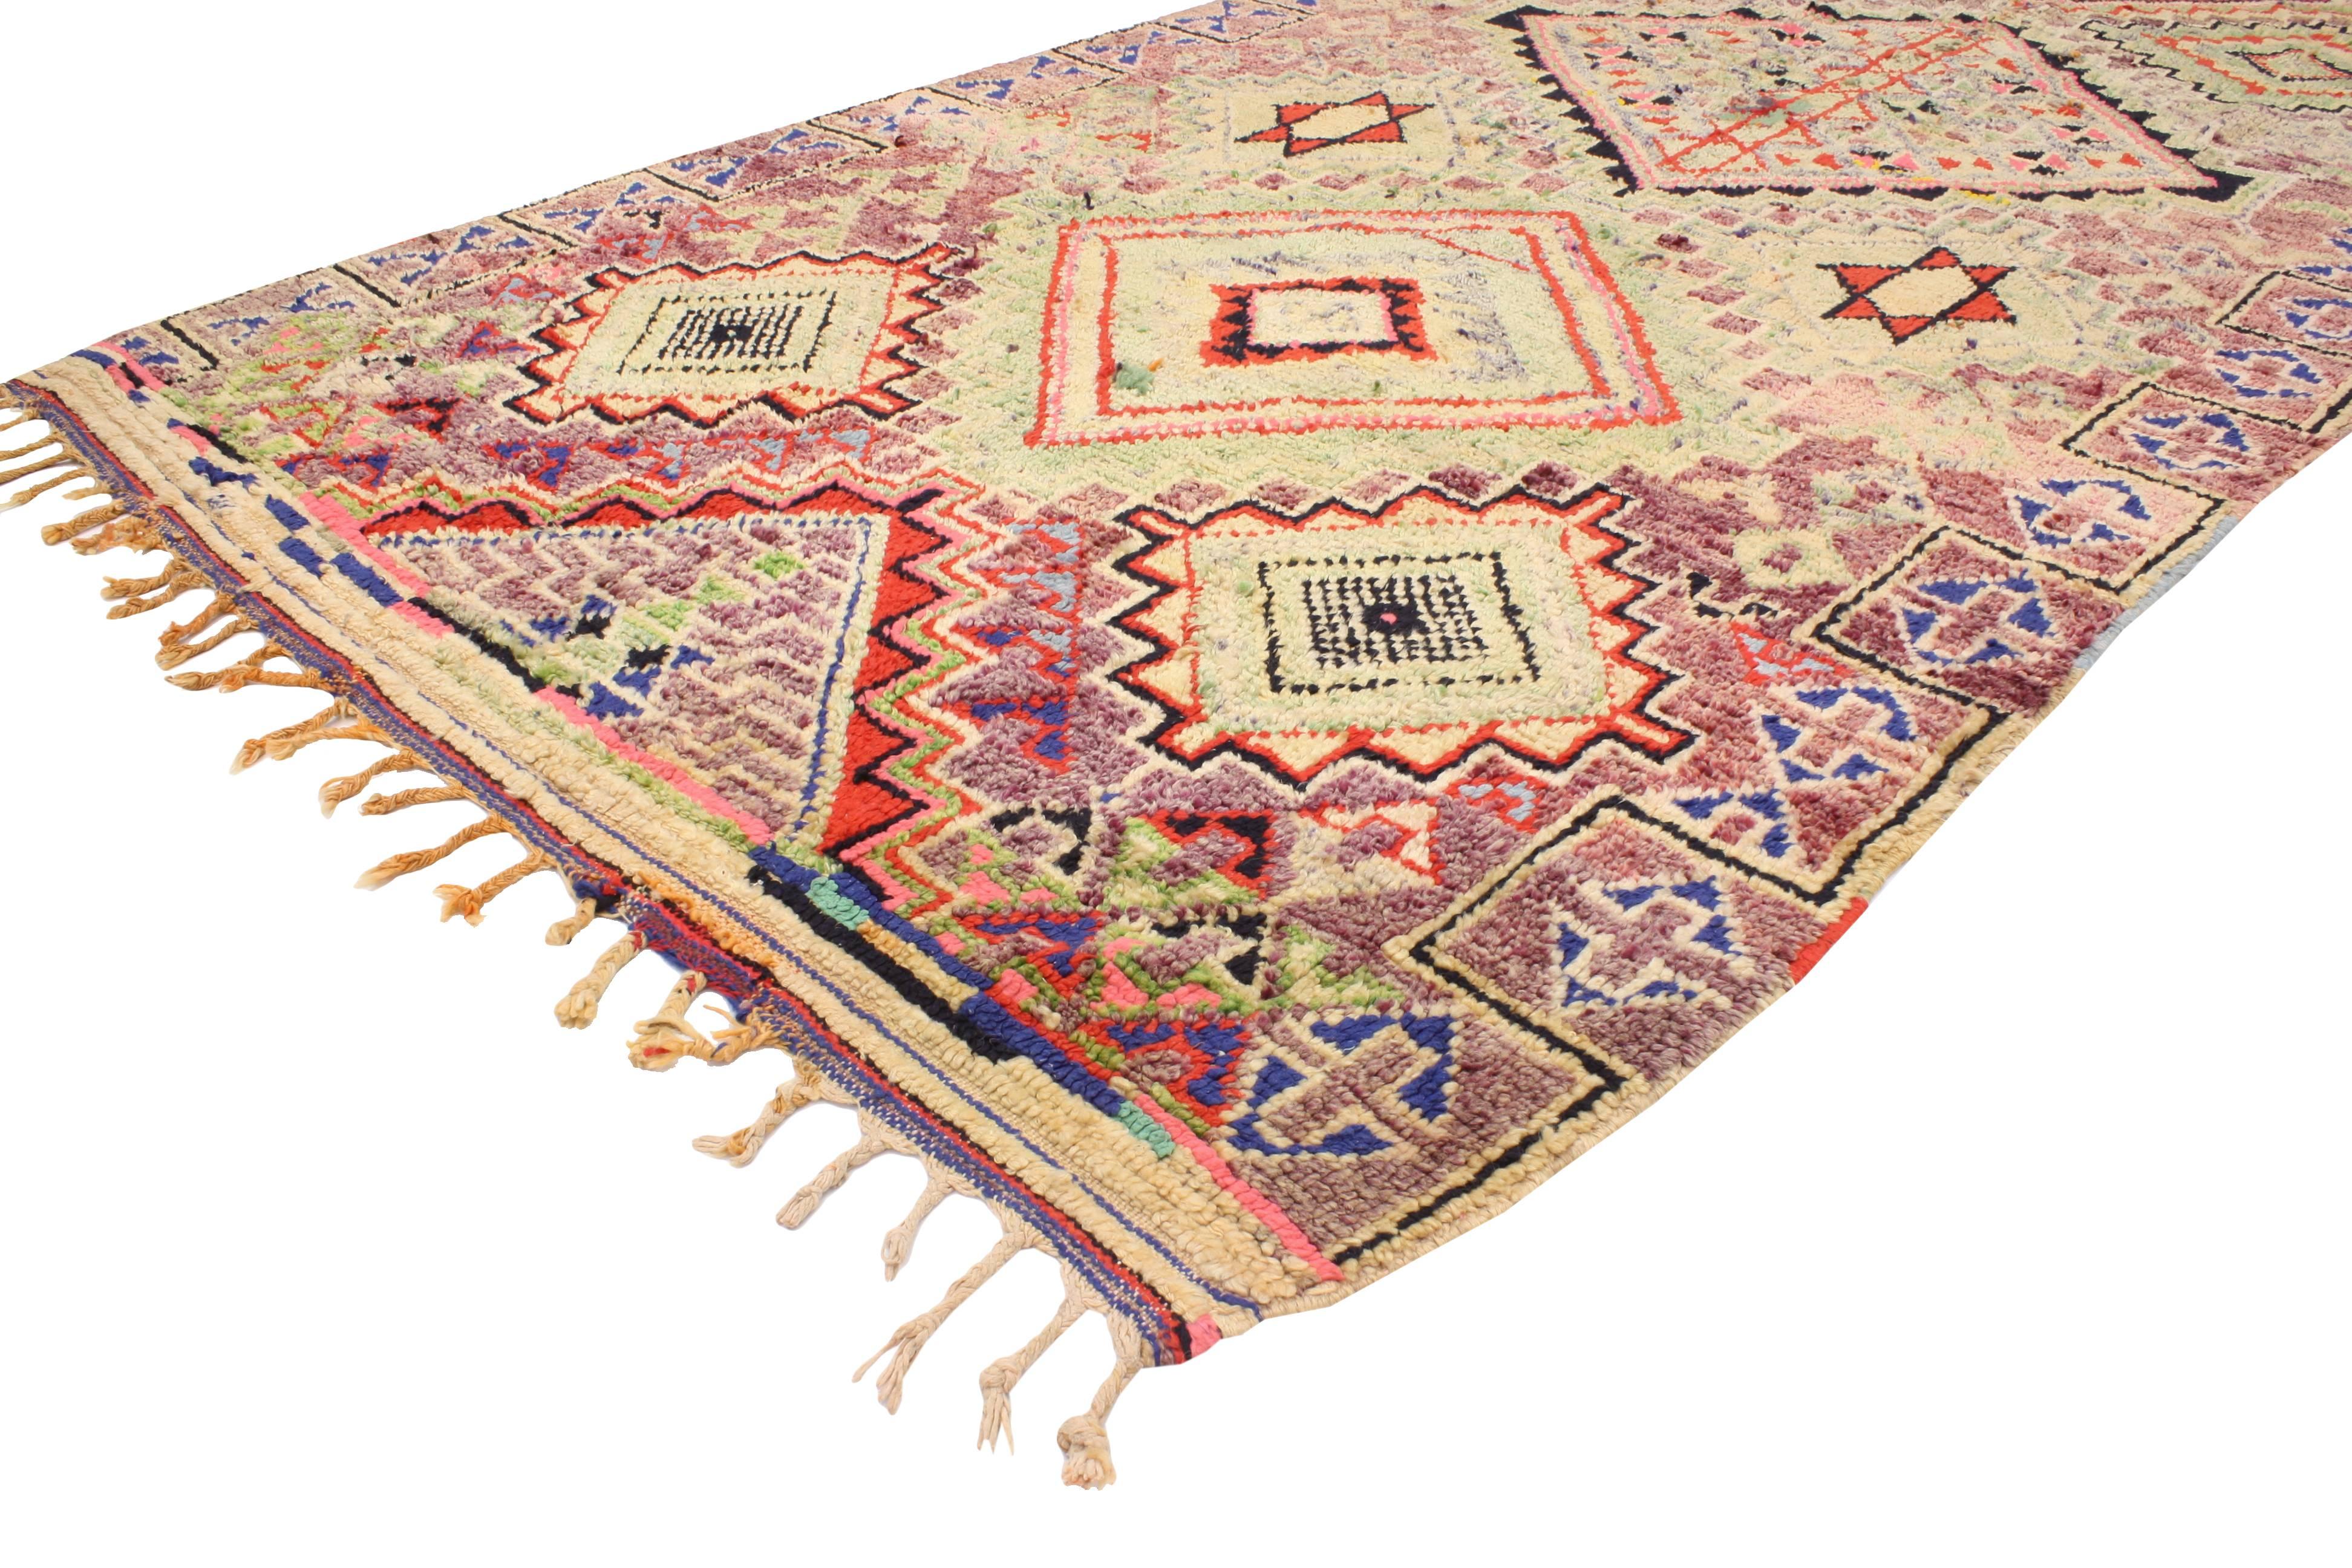 Immersed in ancient Berber Tribe symbols and the Star of David, this vintage Berber Moroccan rug features a modern tribal style with Judaic influence. Rendered in pastel hues of lavender, pink, blush, orange, plum, soft mint green with accents of